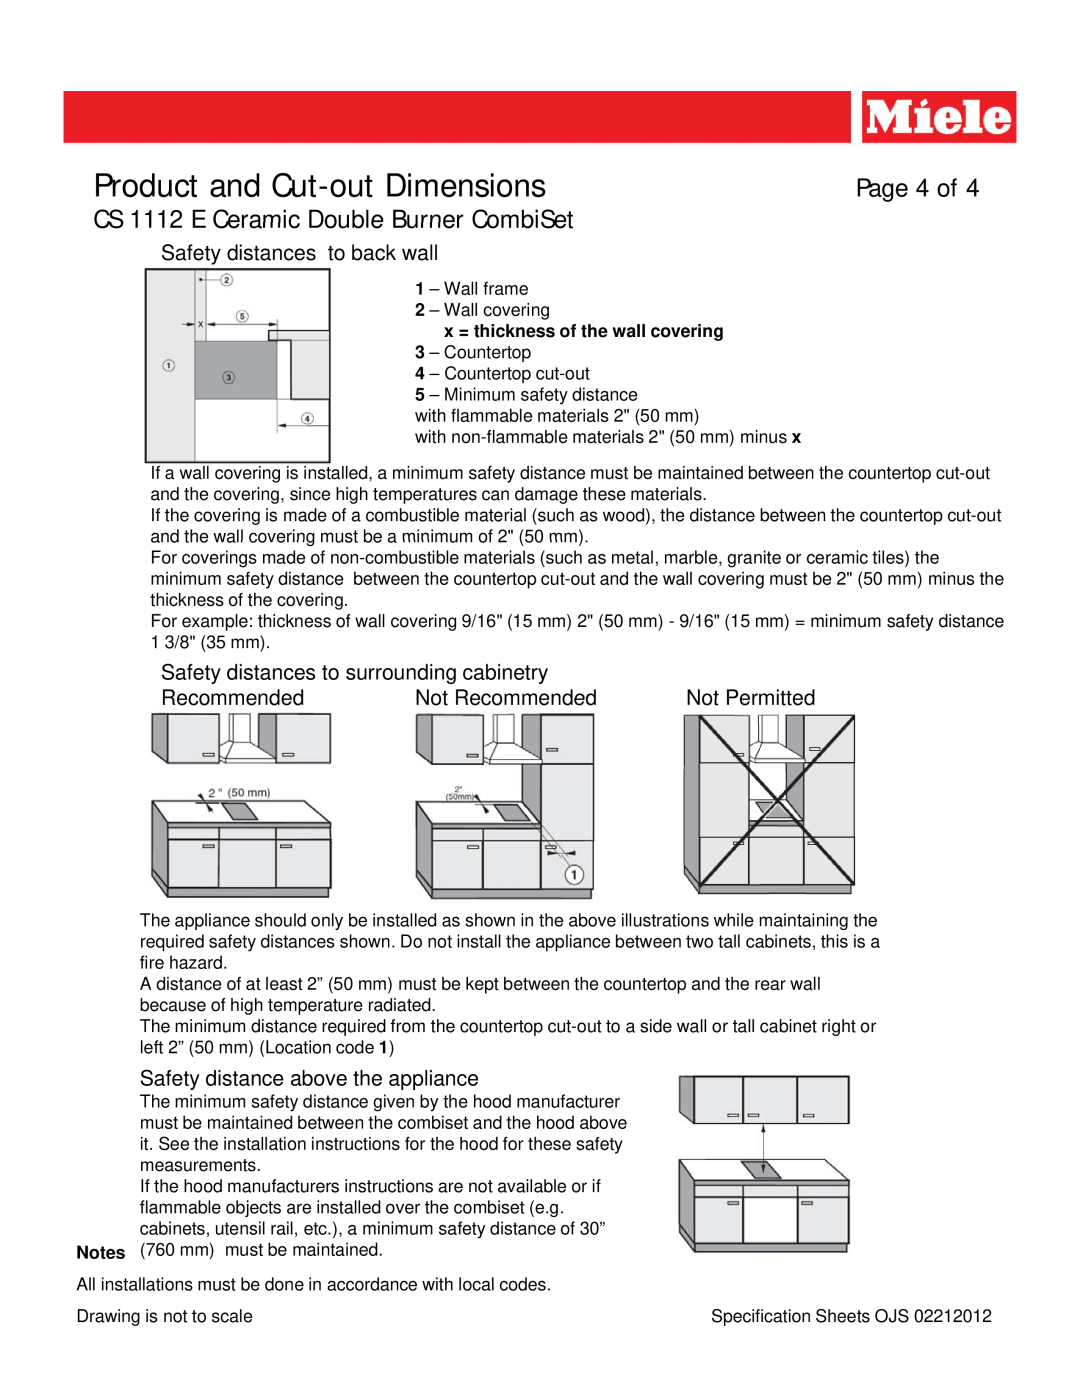 Miele CS 1112 E Product and Cut-out Dimensions, x = thickness of the wall covering 3 - Countertop, Page 4 of, Recommended 